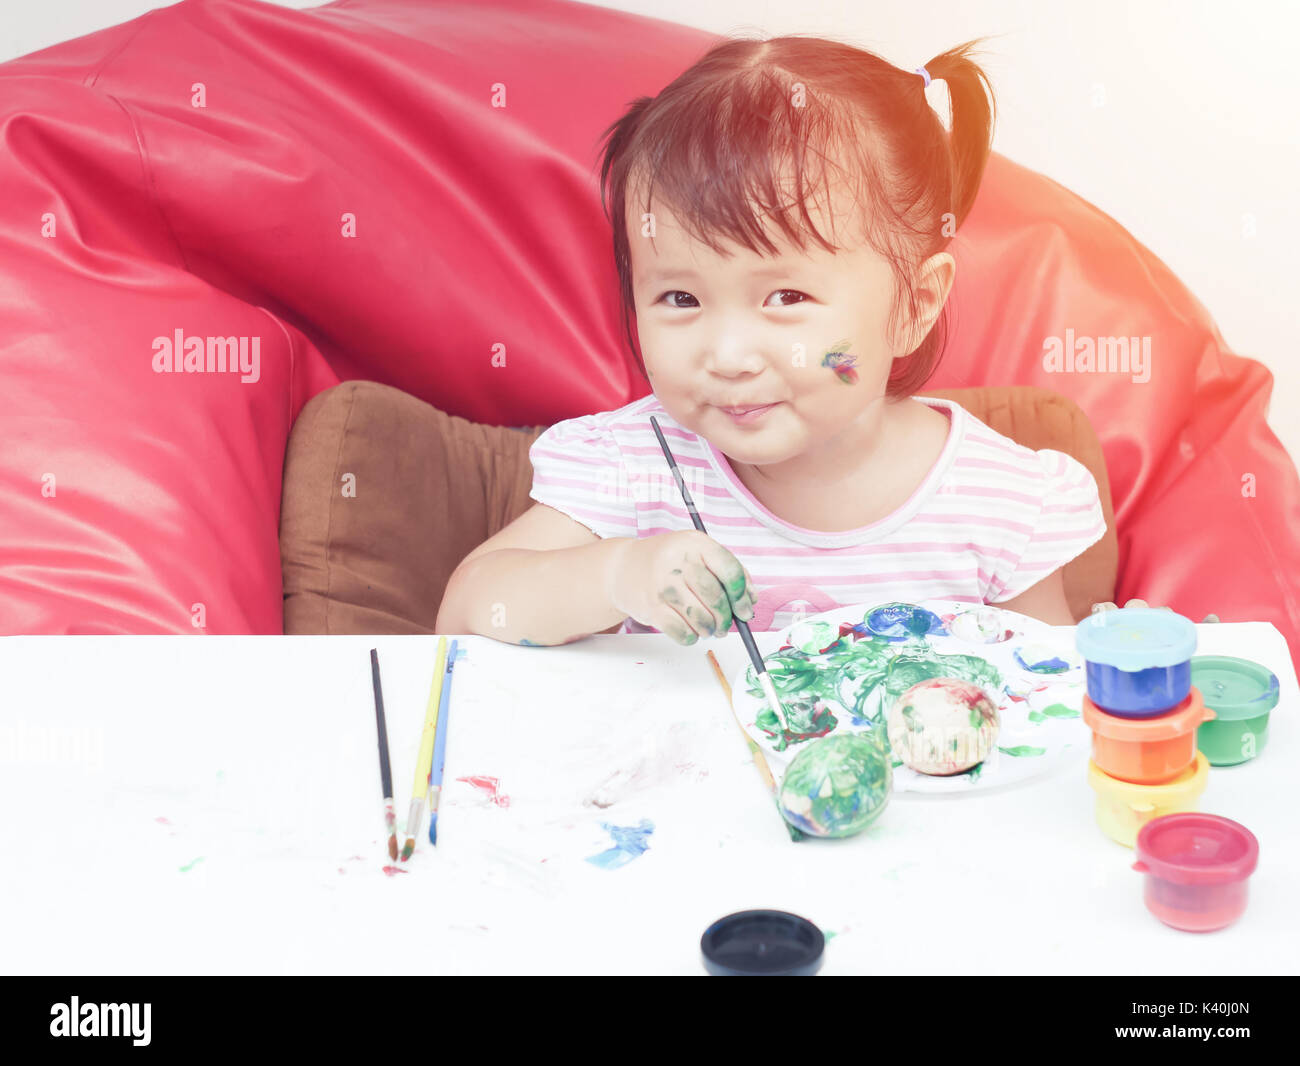 Little Girl Painting with paintbrush and colorful paints children development concept Stock Photo